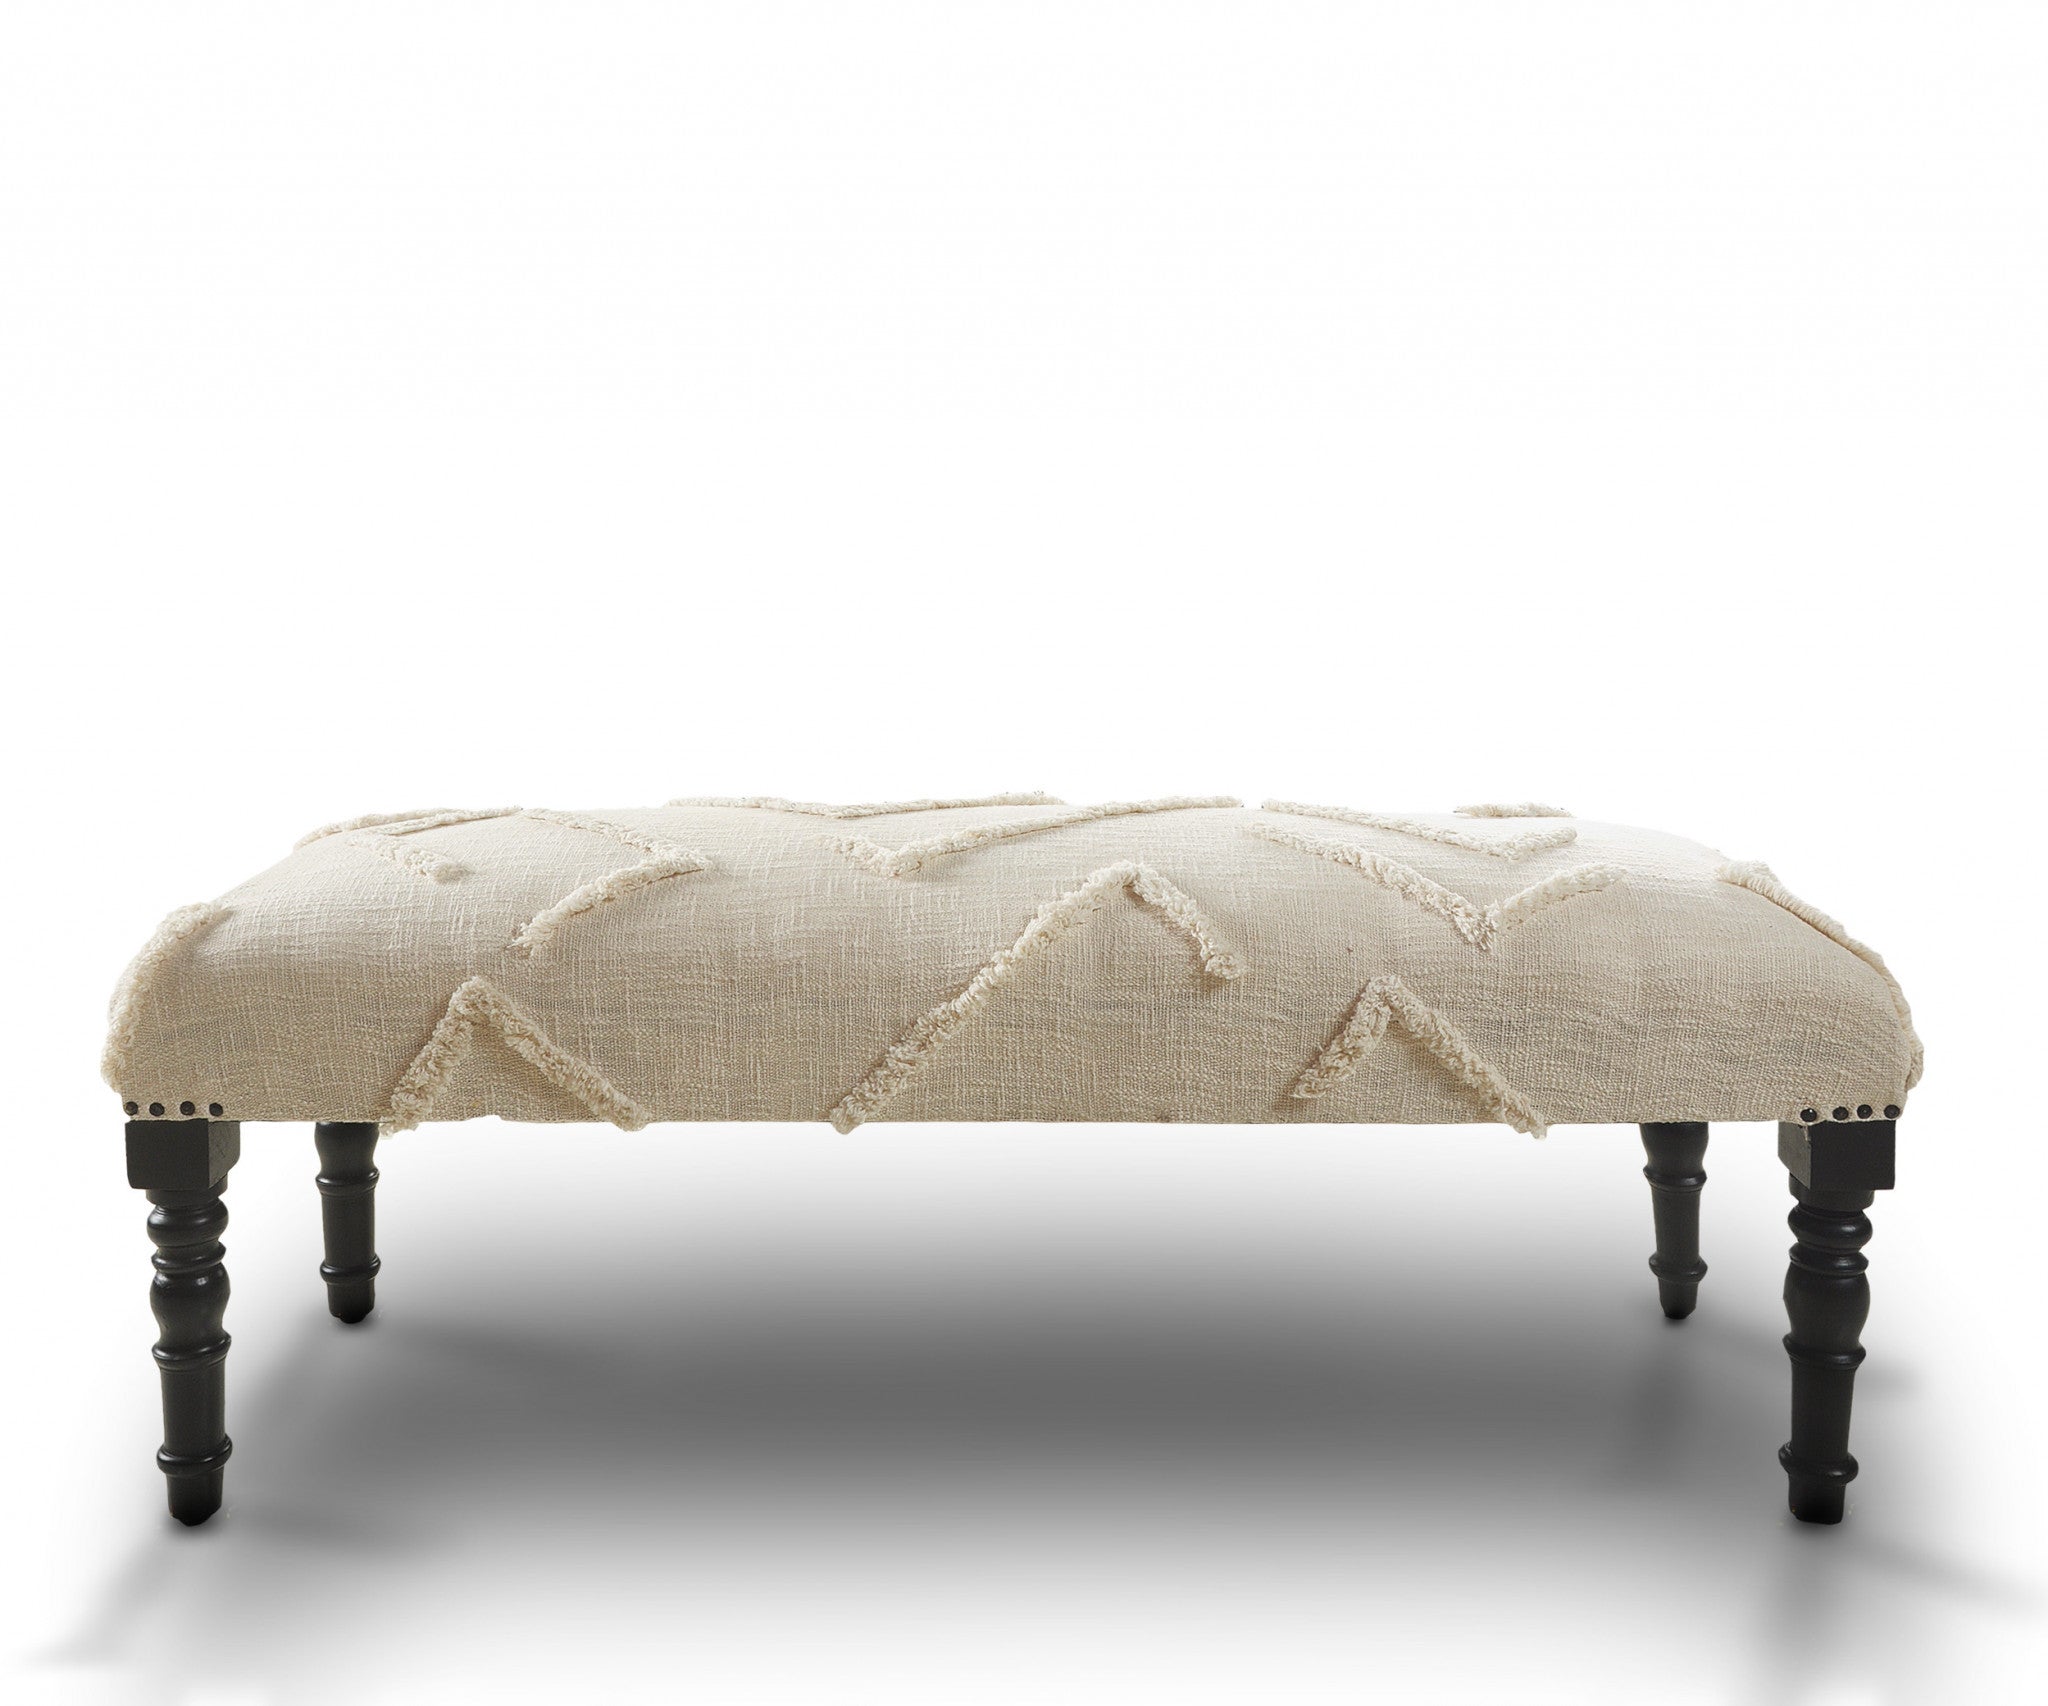 47" Cream And Black Leg Abstract Upholstered Bench